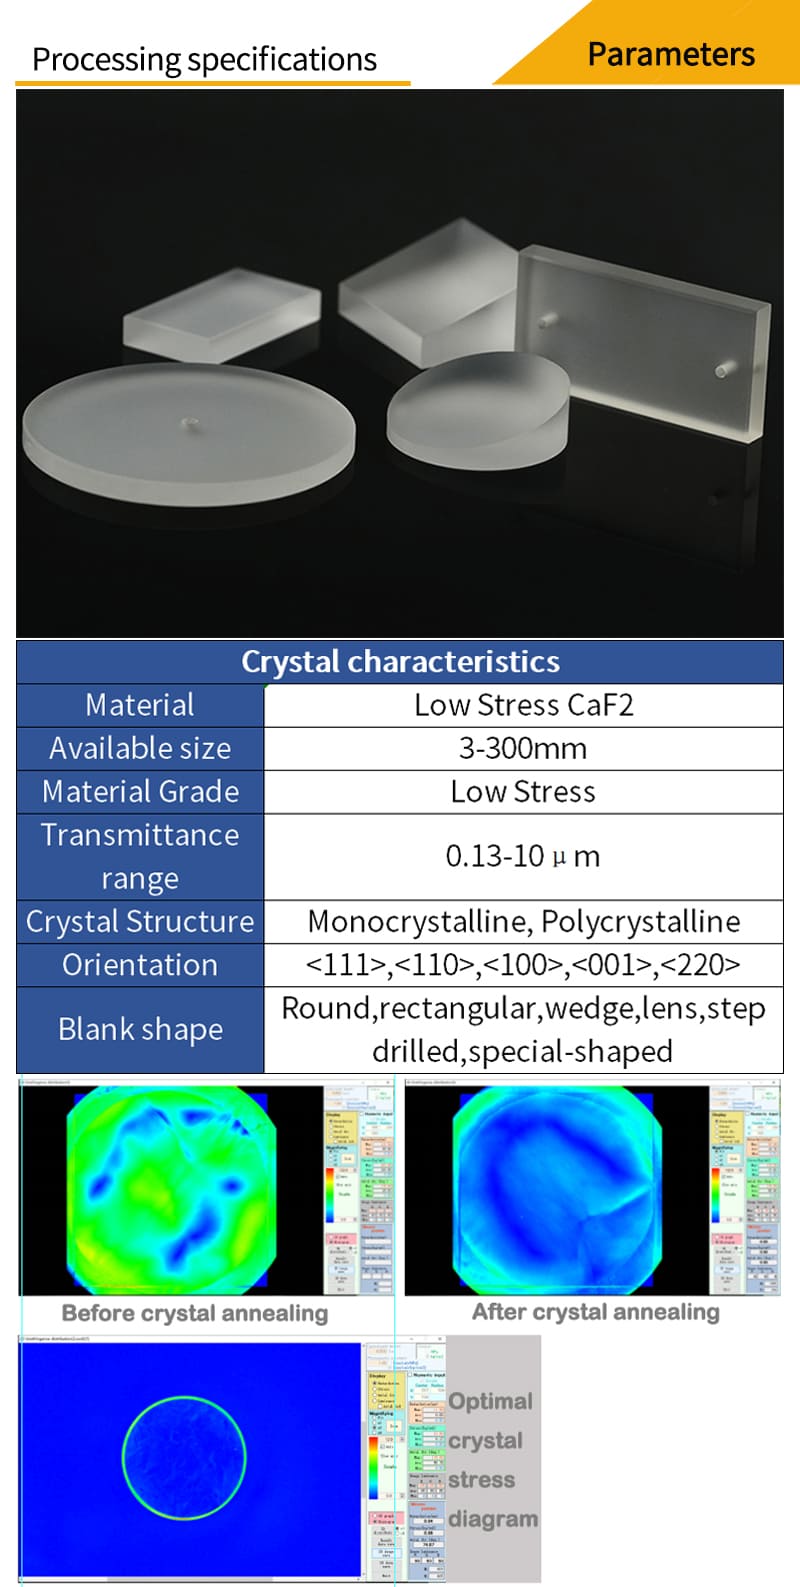 Customized parameters and optimal crystal stress diagram for low stress calcium fluoride 